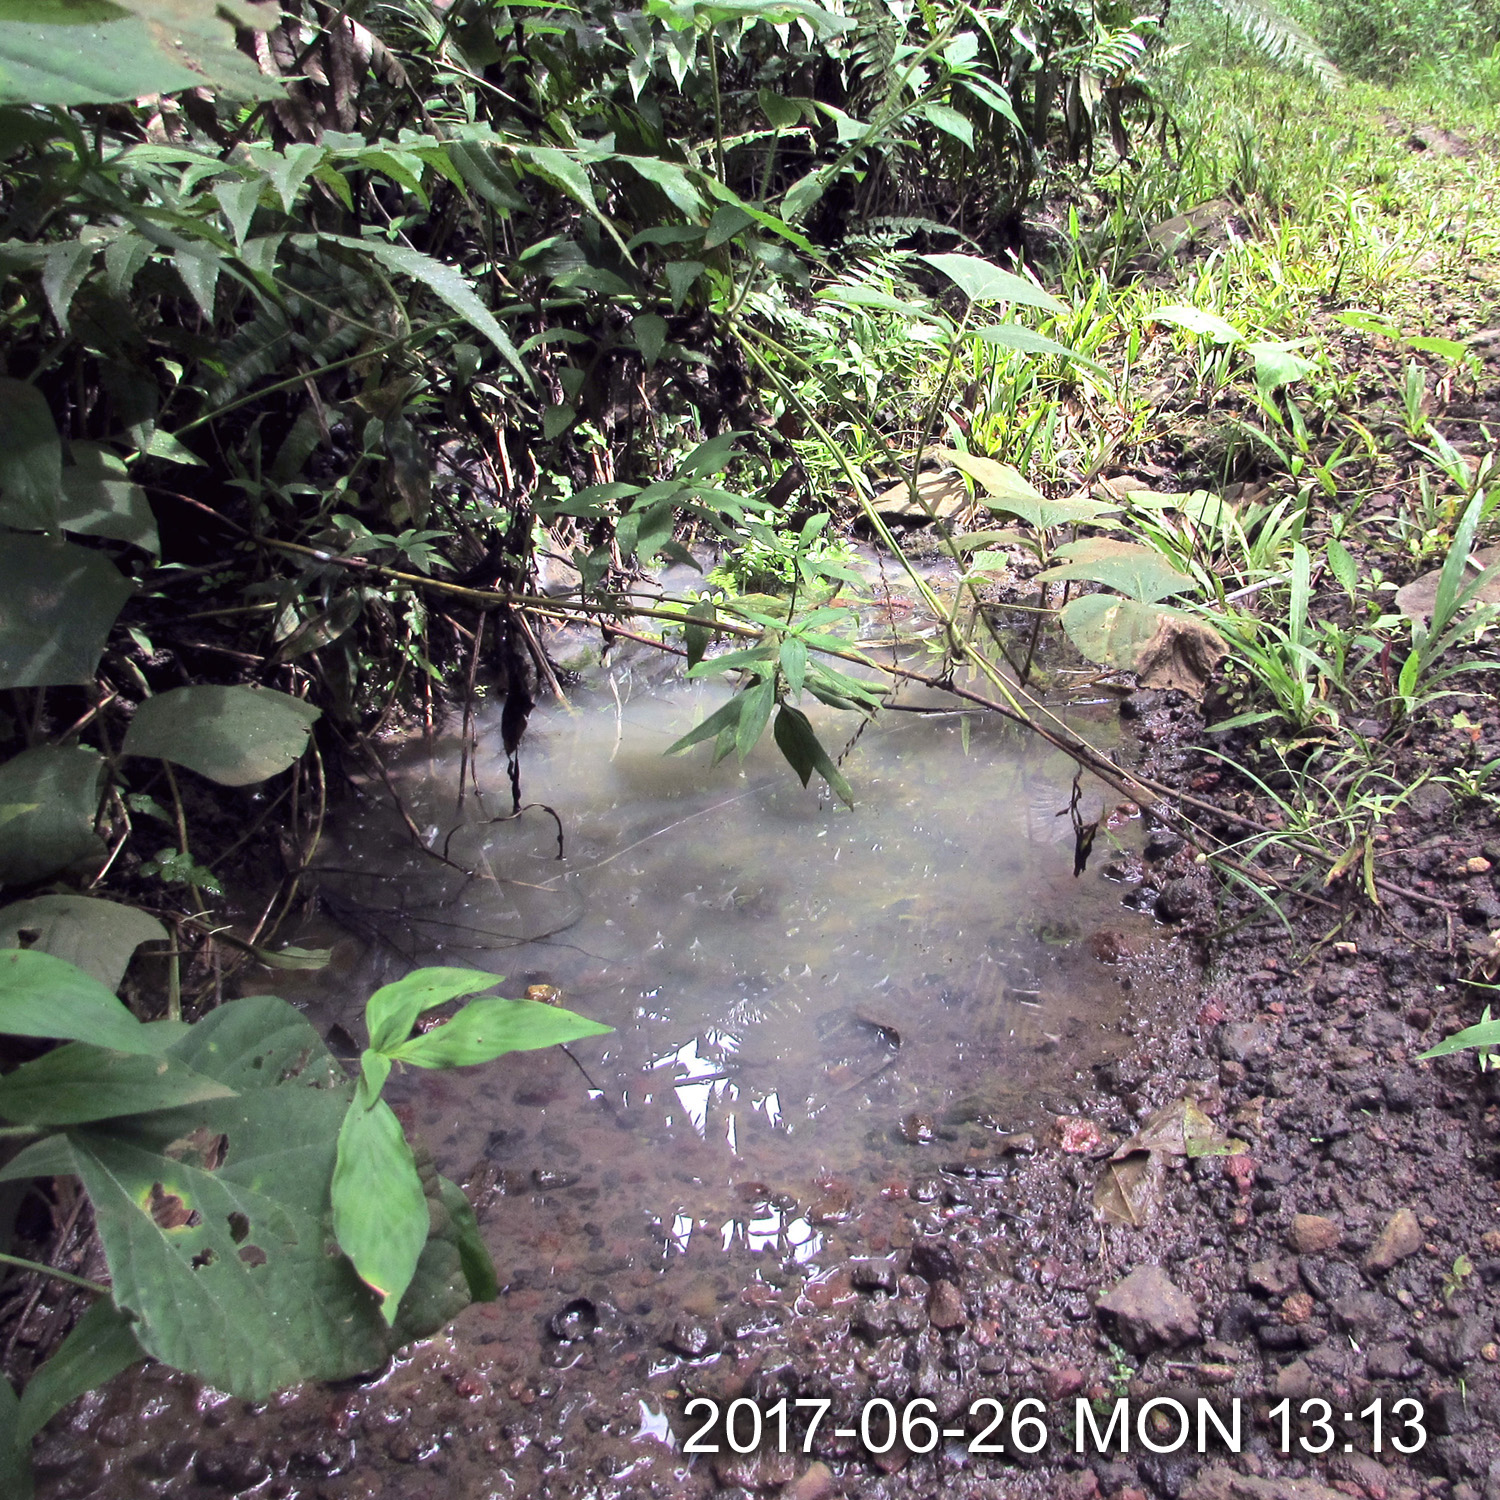 Shallow rainwater habitats in Sabah where damselfly Pseudagrion sp HILLZONE were found.